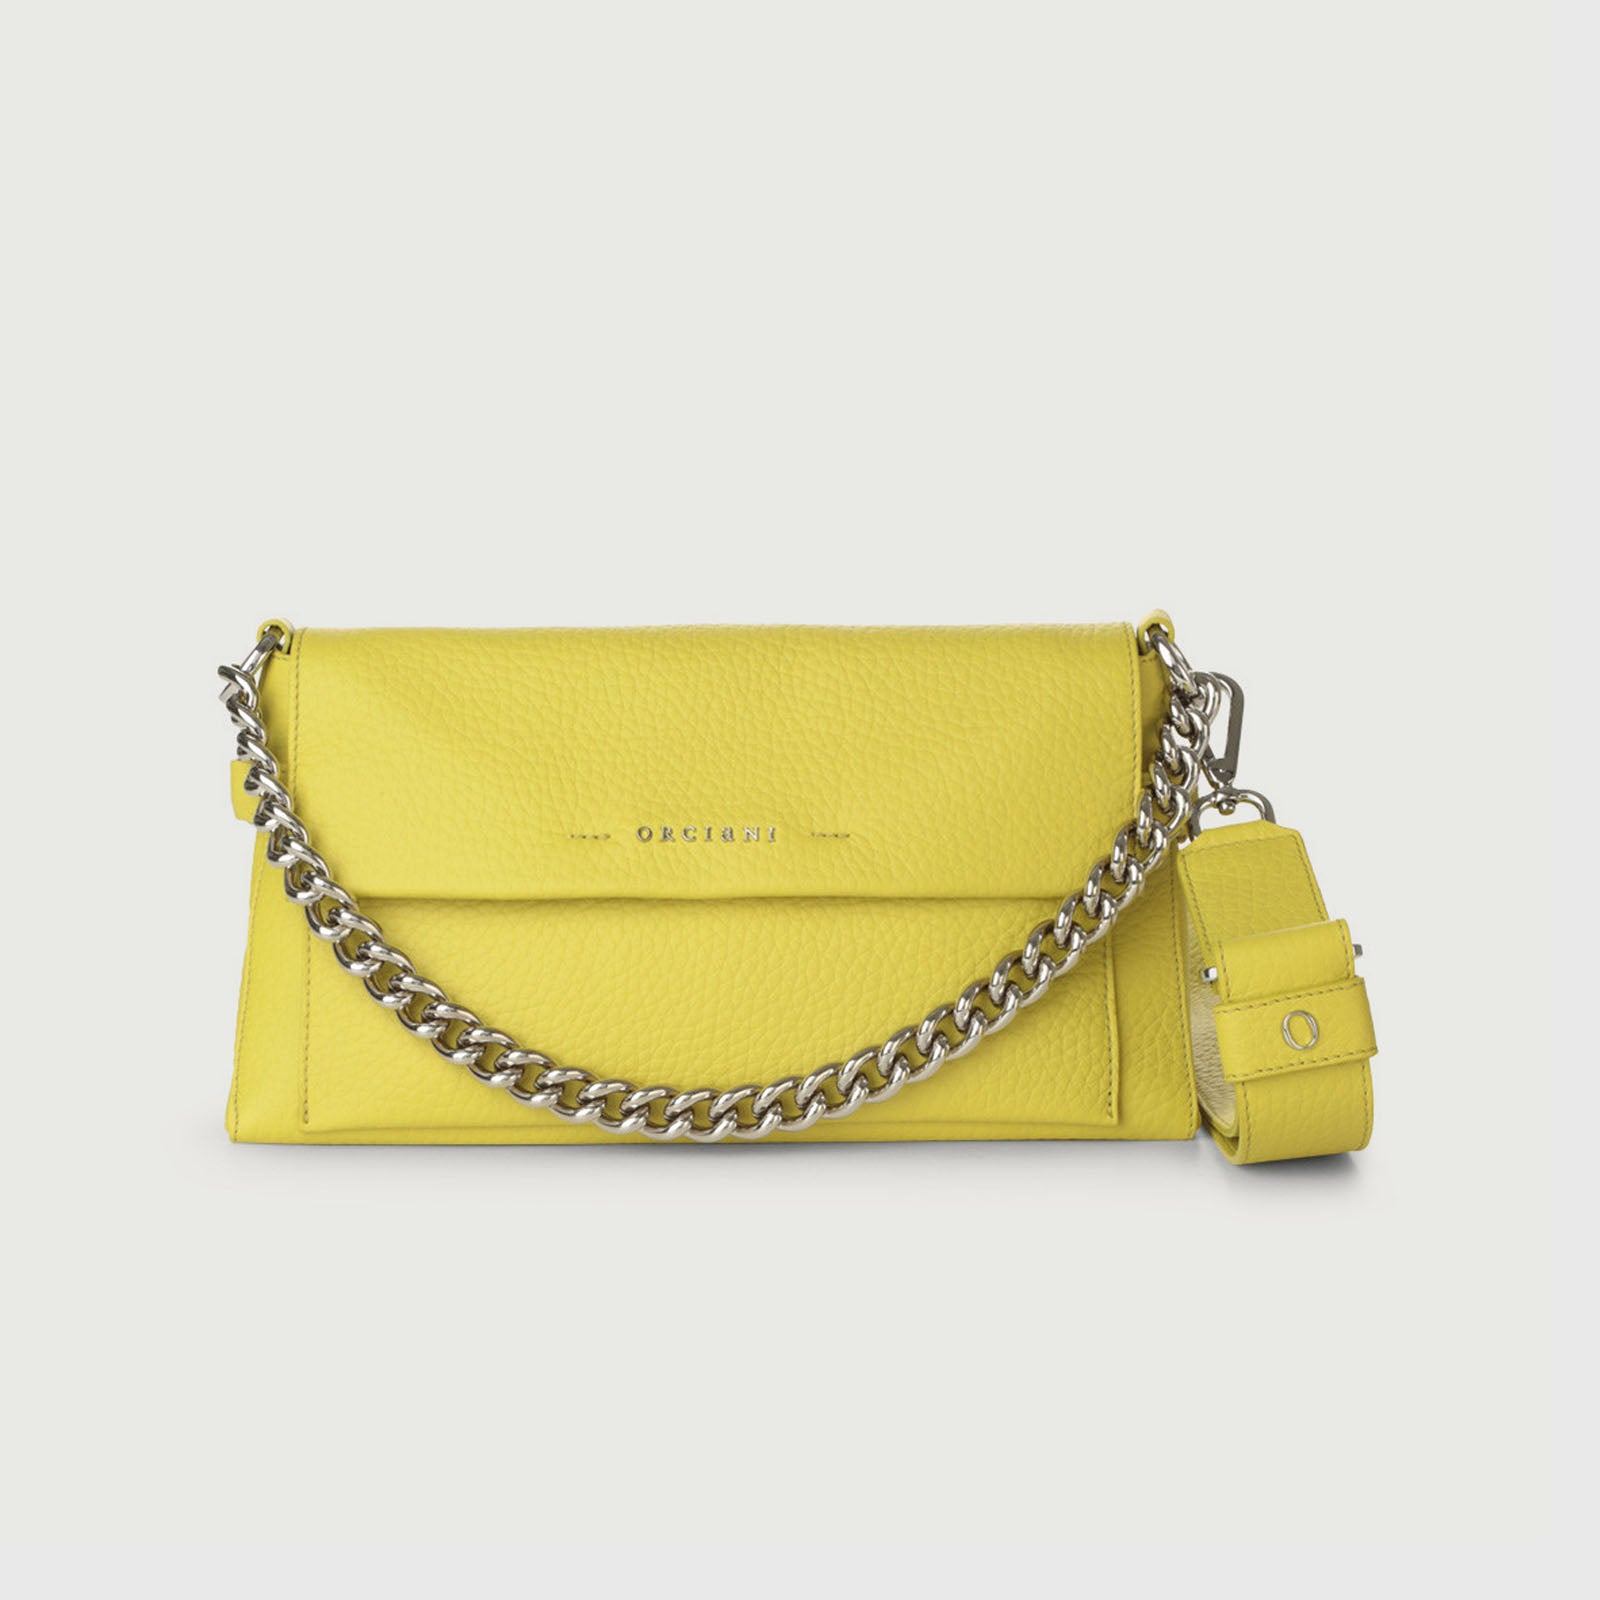 Orciani Shoulder Bag Missy Longuette Soft in Yellow Leather - 5